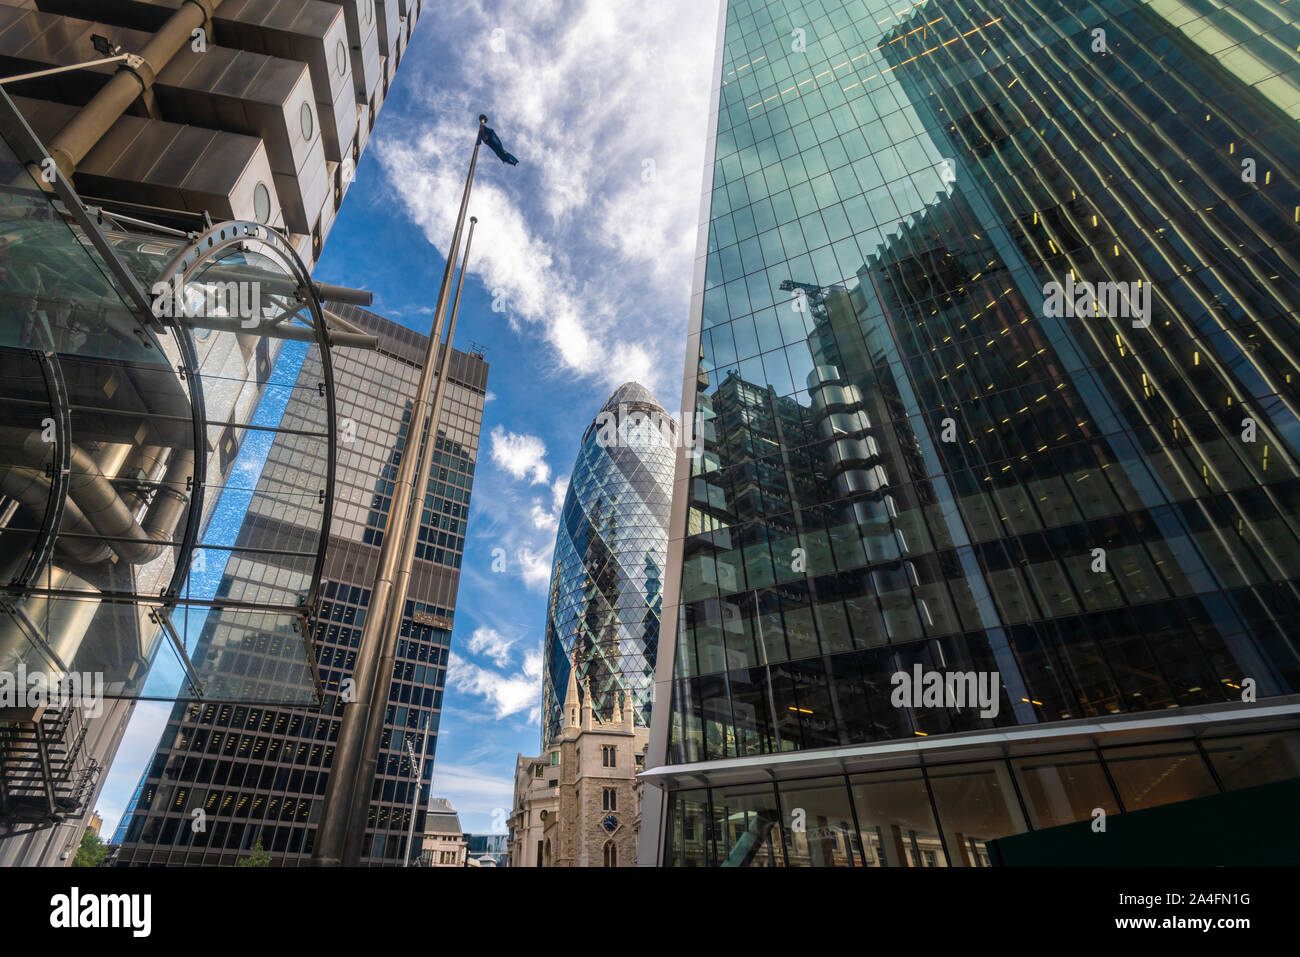 Lloyds, Gherkin and glass business tower at the city of london Stock Photo